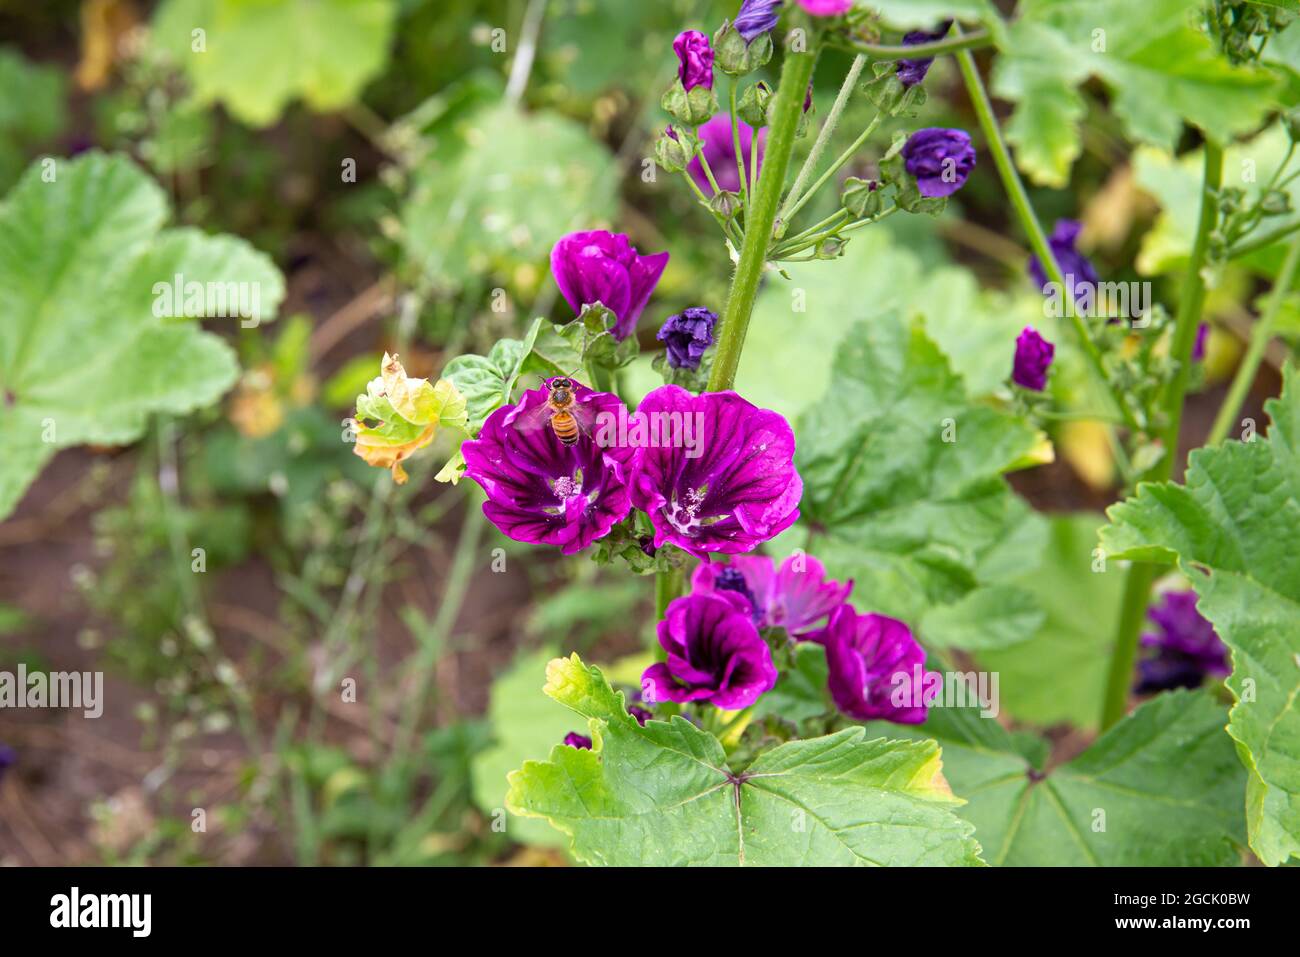 Malva sylvestris, common mallow agricultural field, purple flowers growing in summer outdoors. Stock Photo